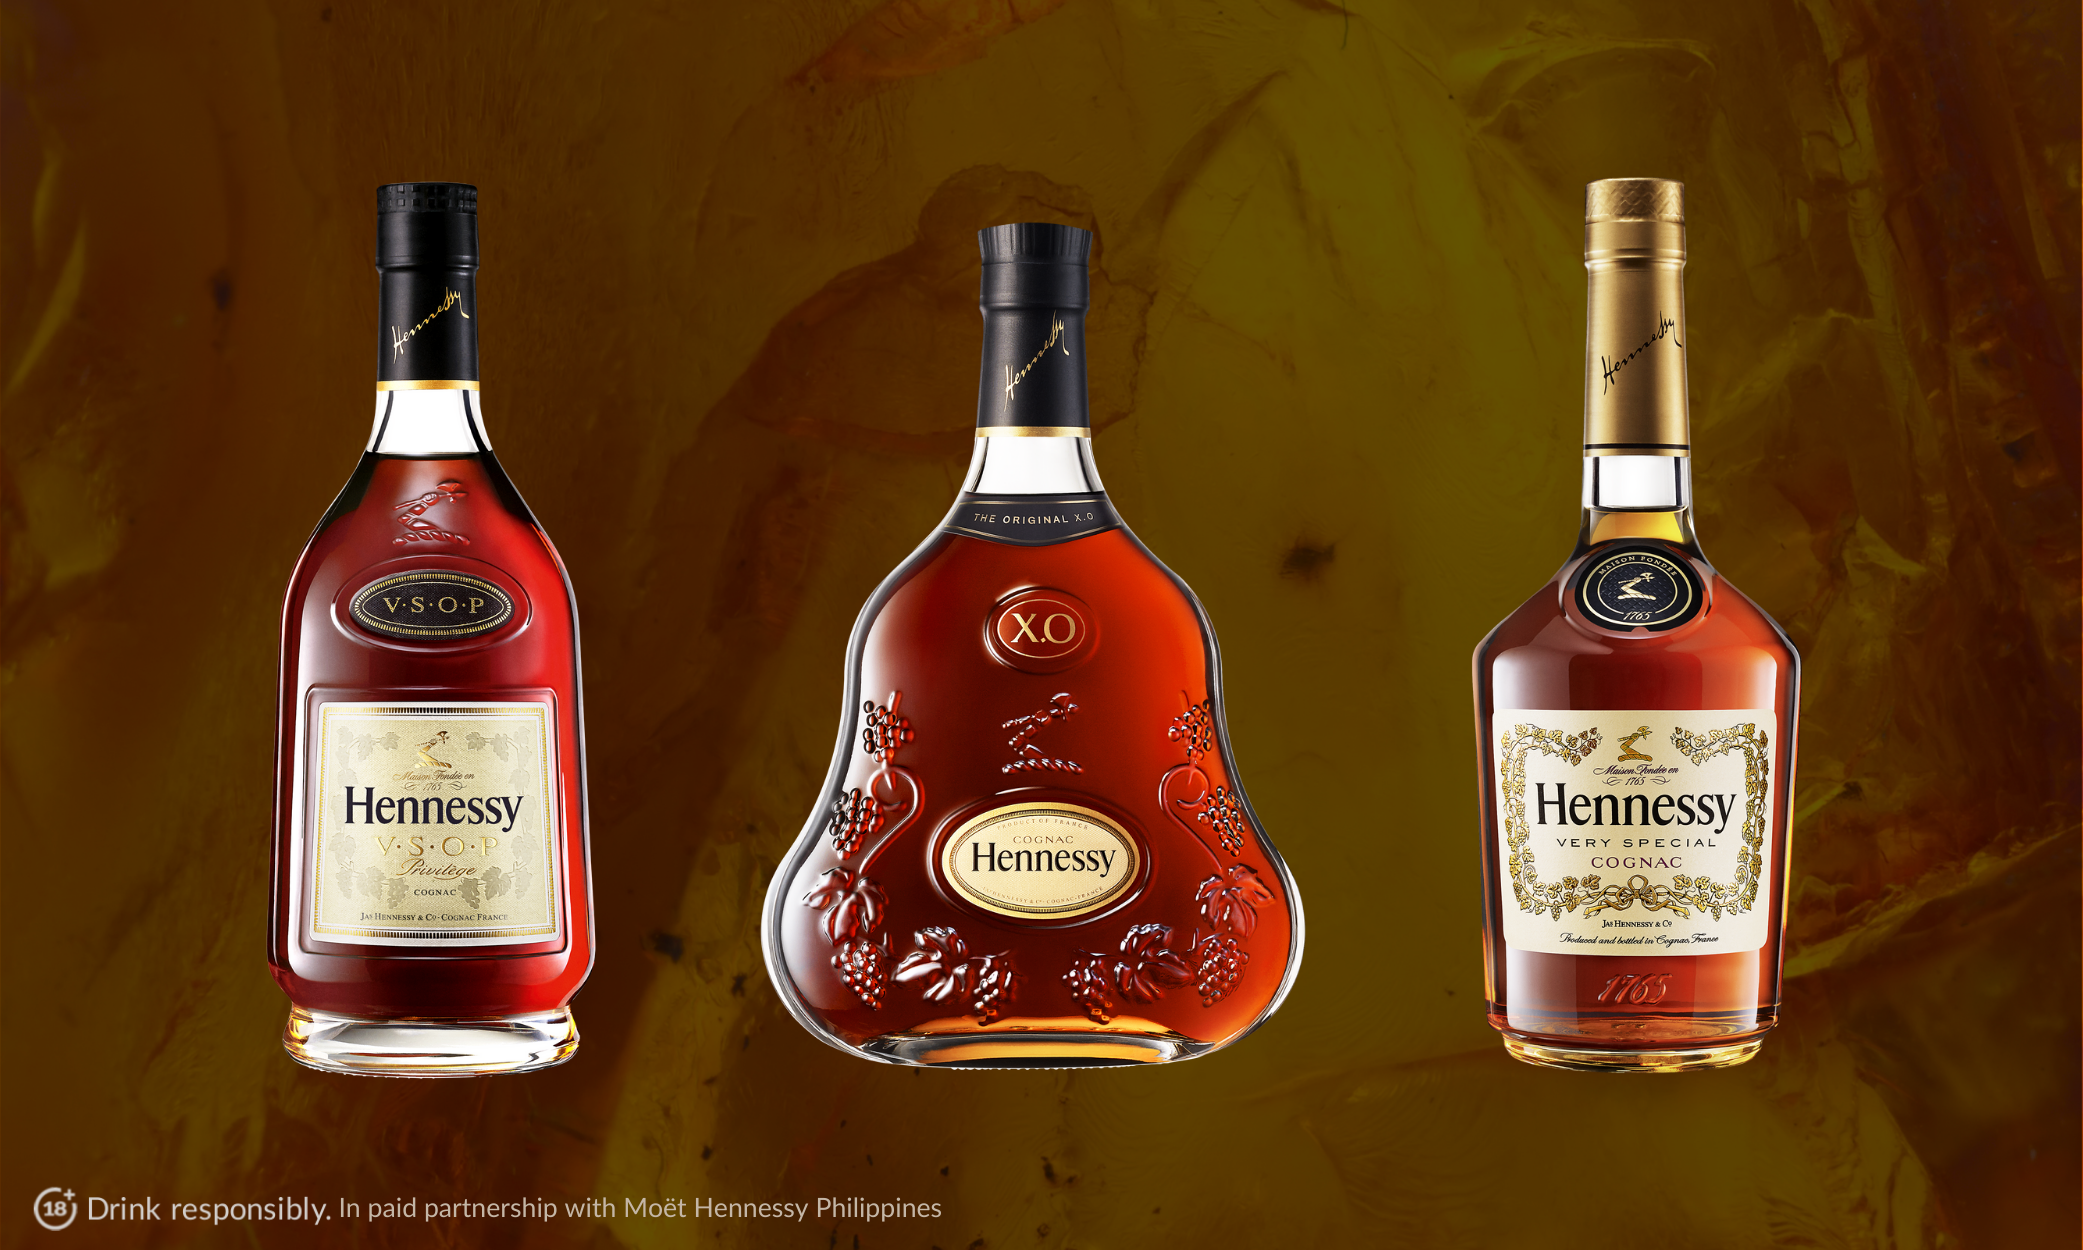 10 Things You Should Know About Hennessy Cognac